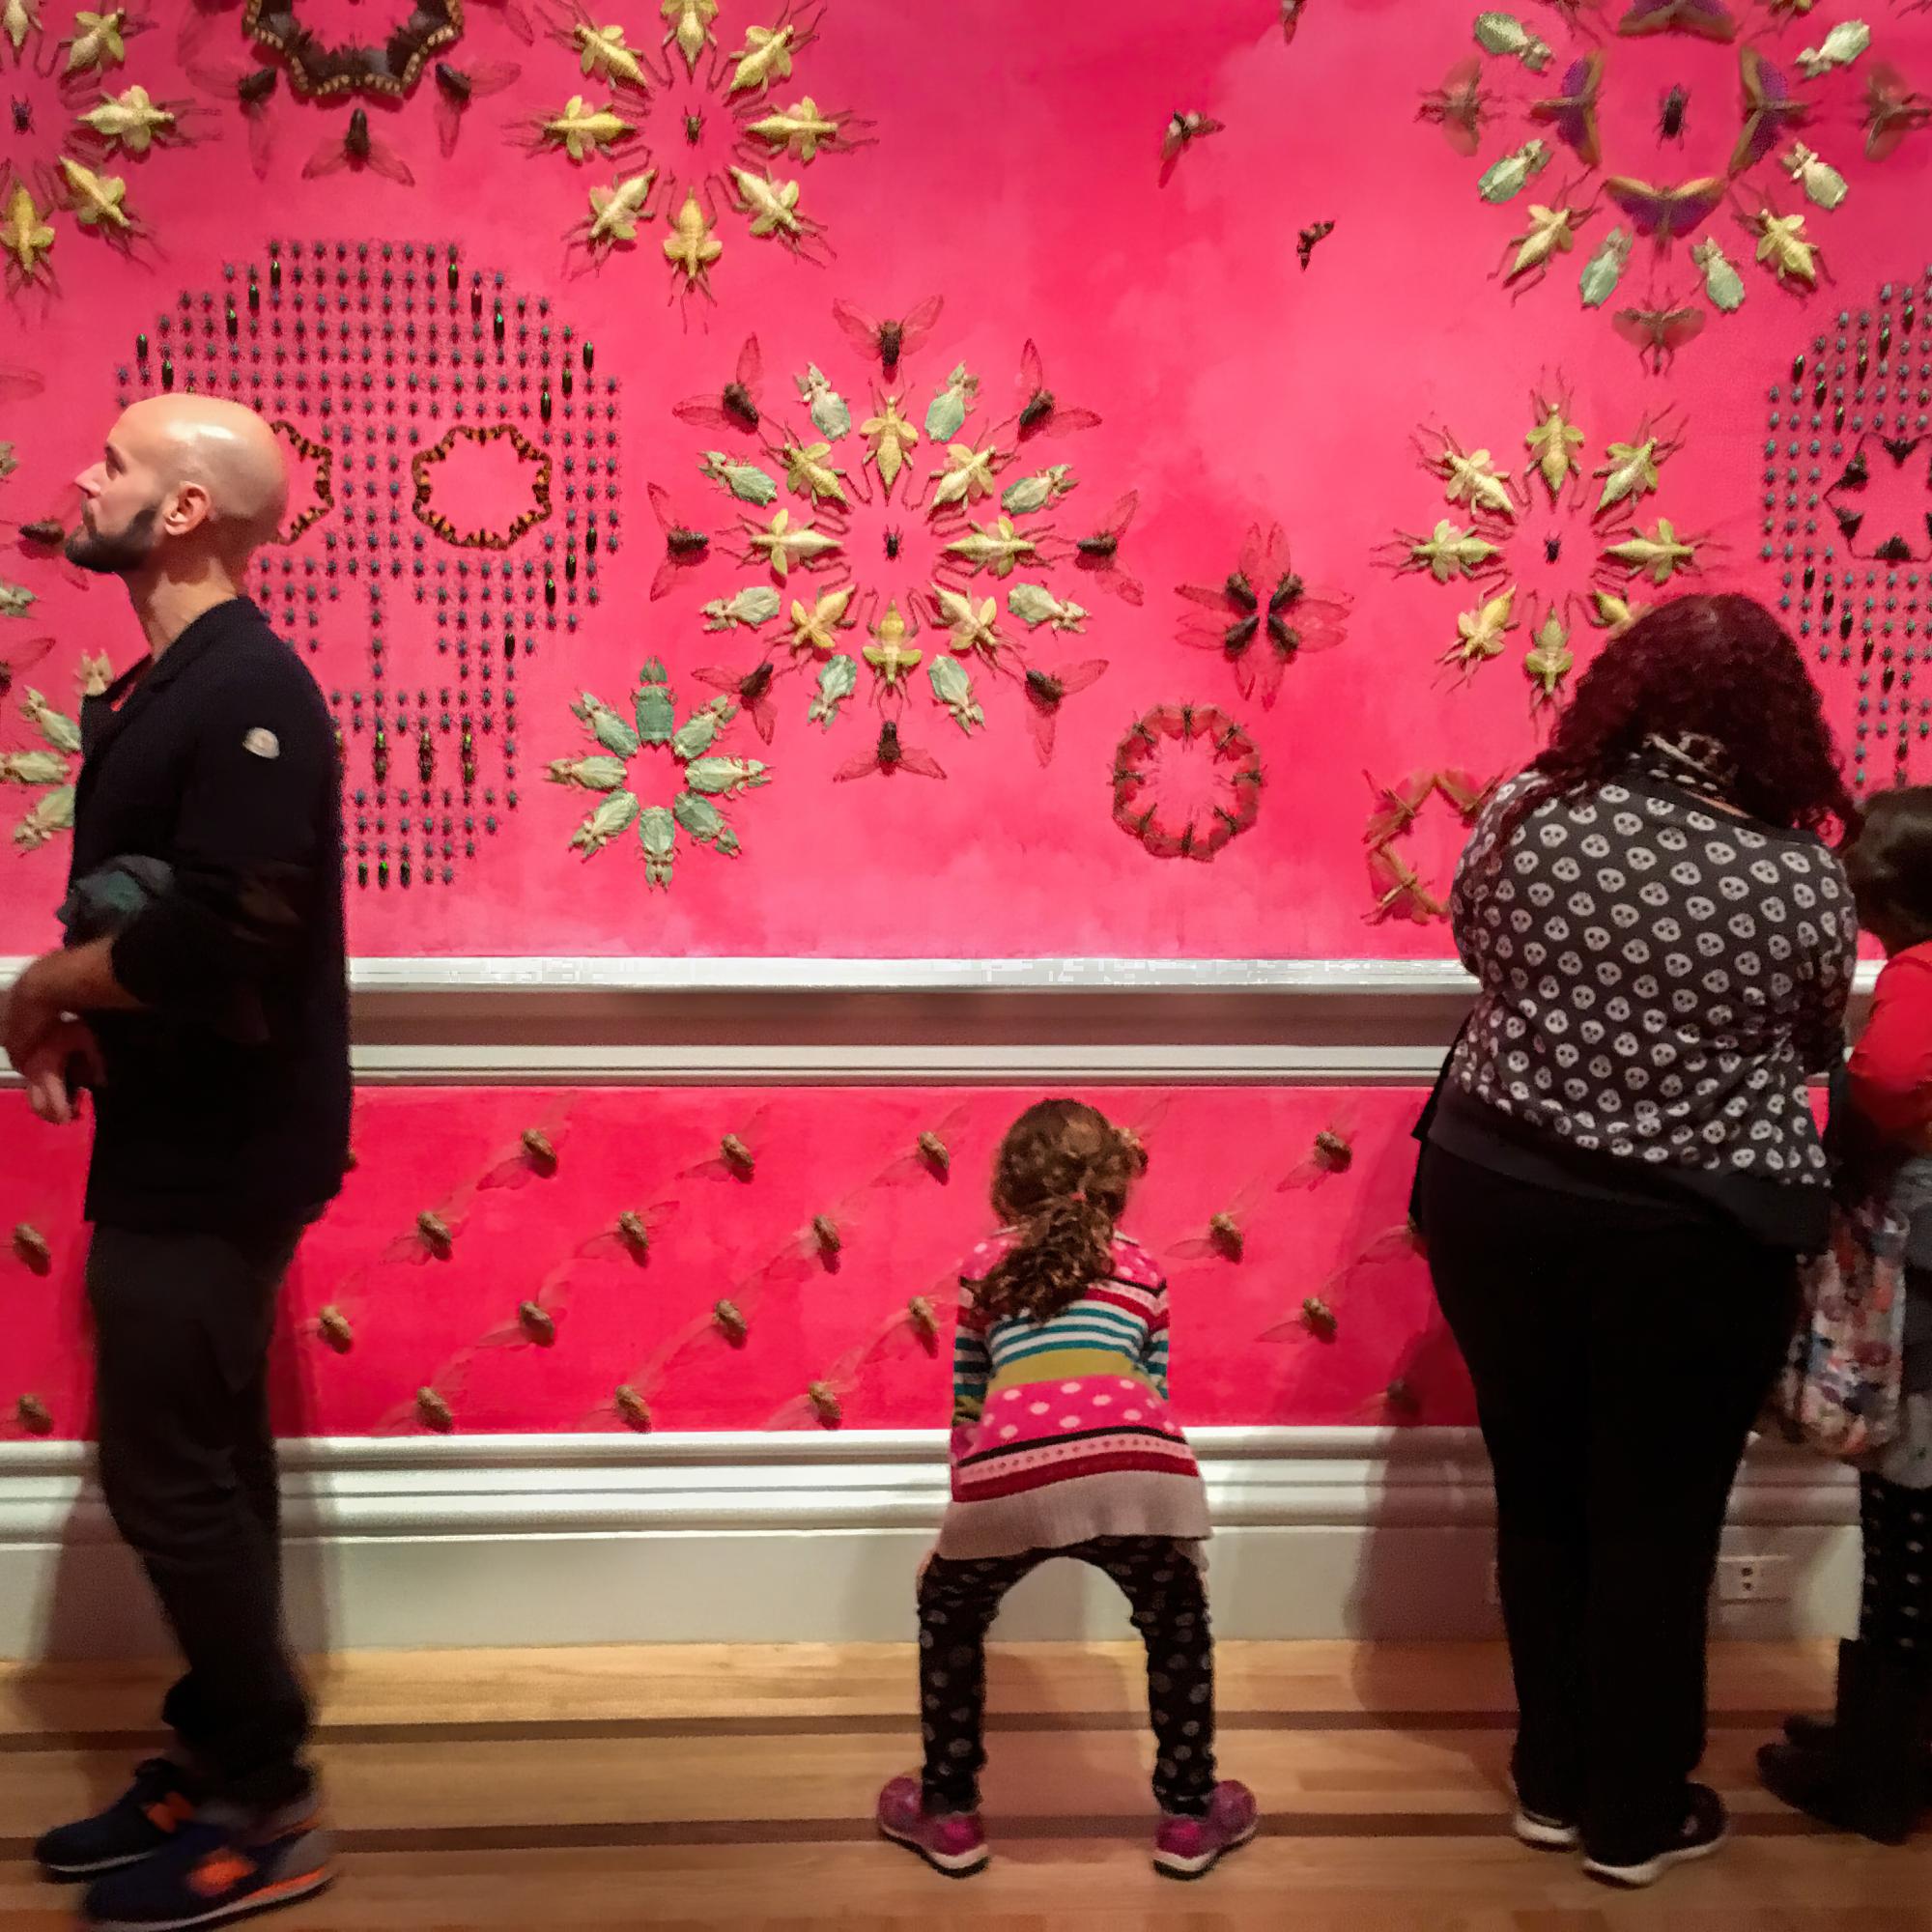 Viewing Art - A young visitor seems to merge into Jennifer Angus's...